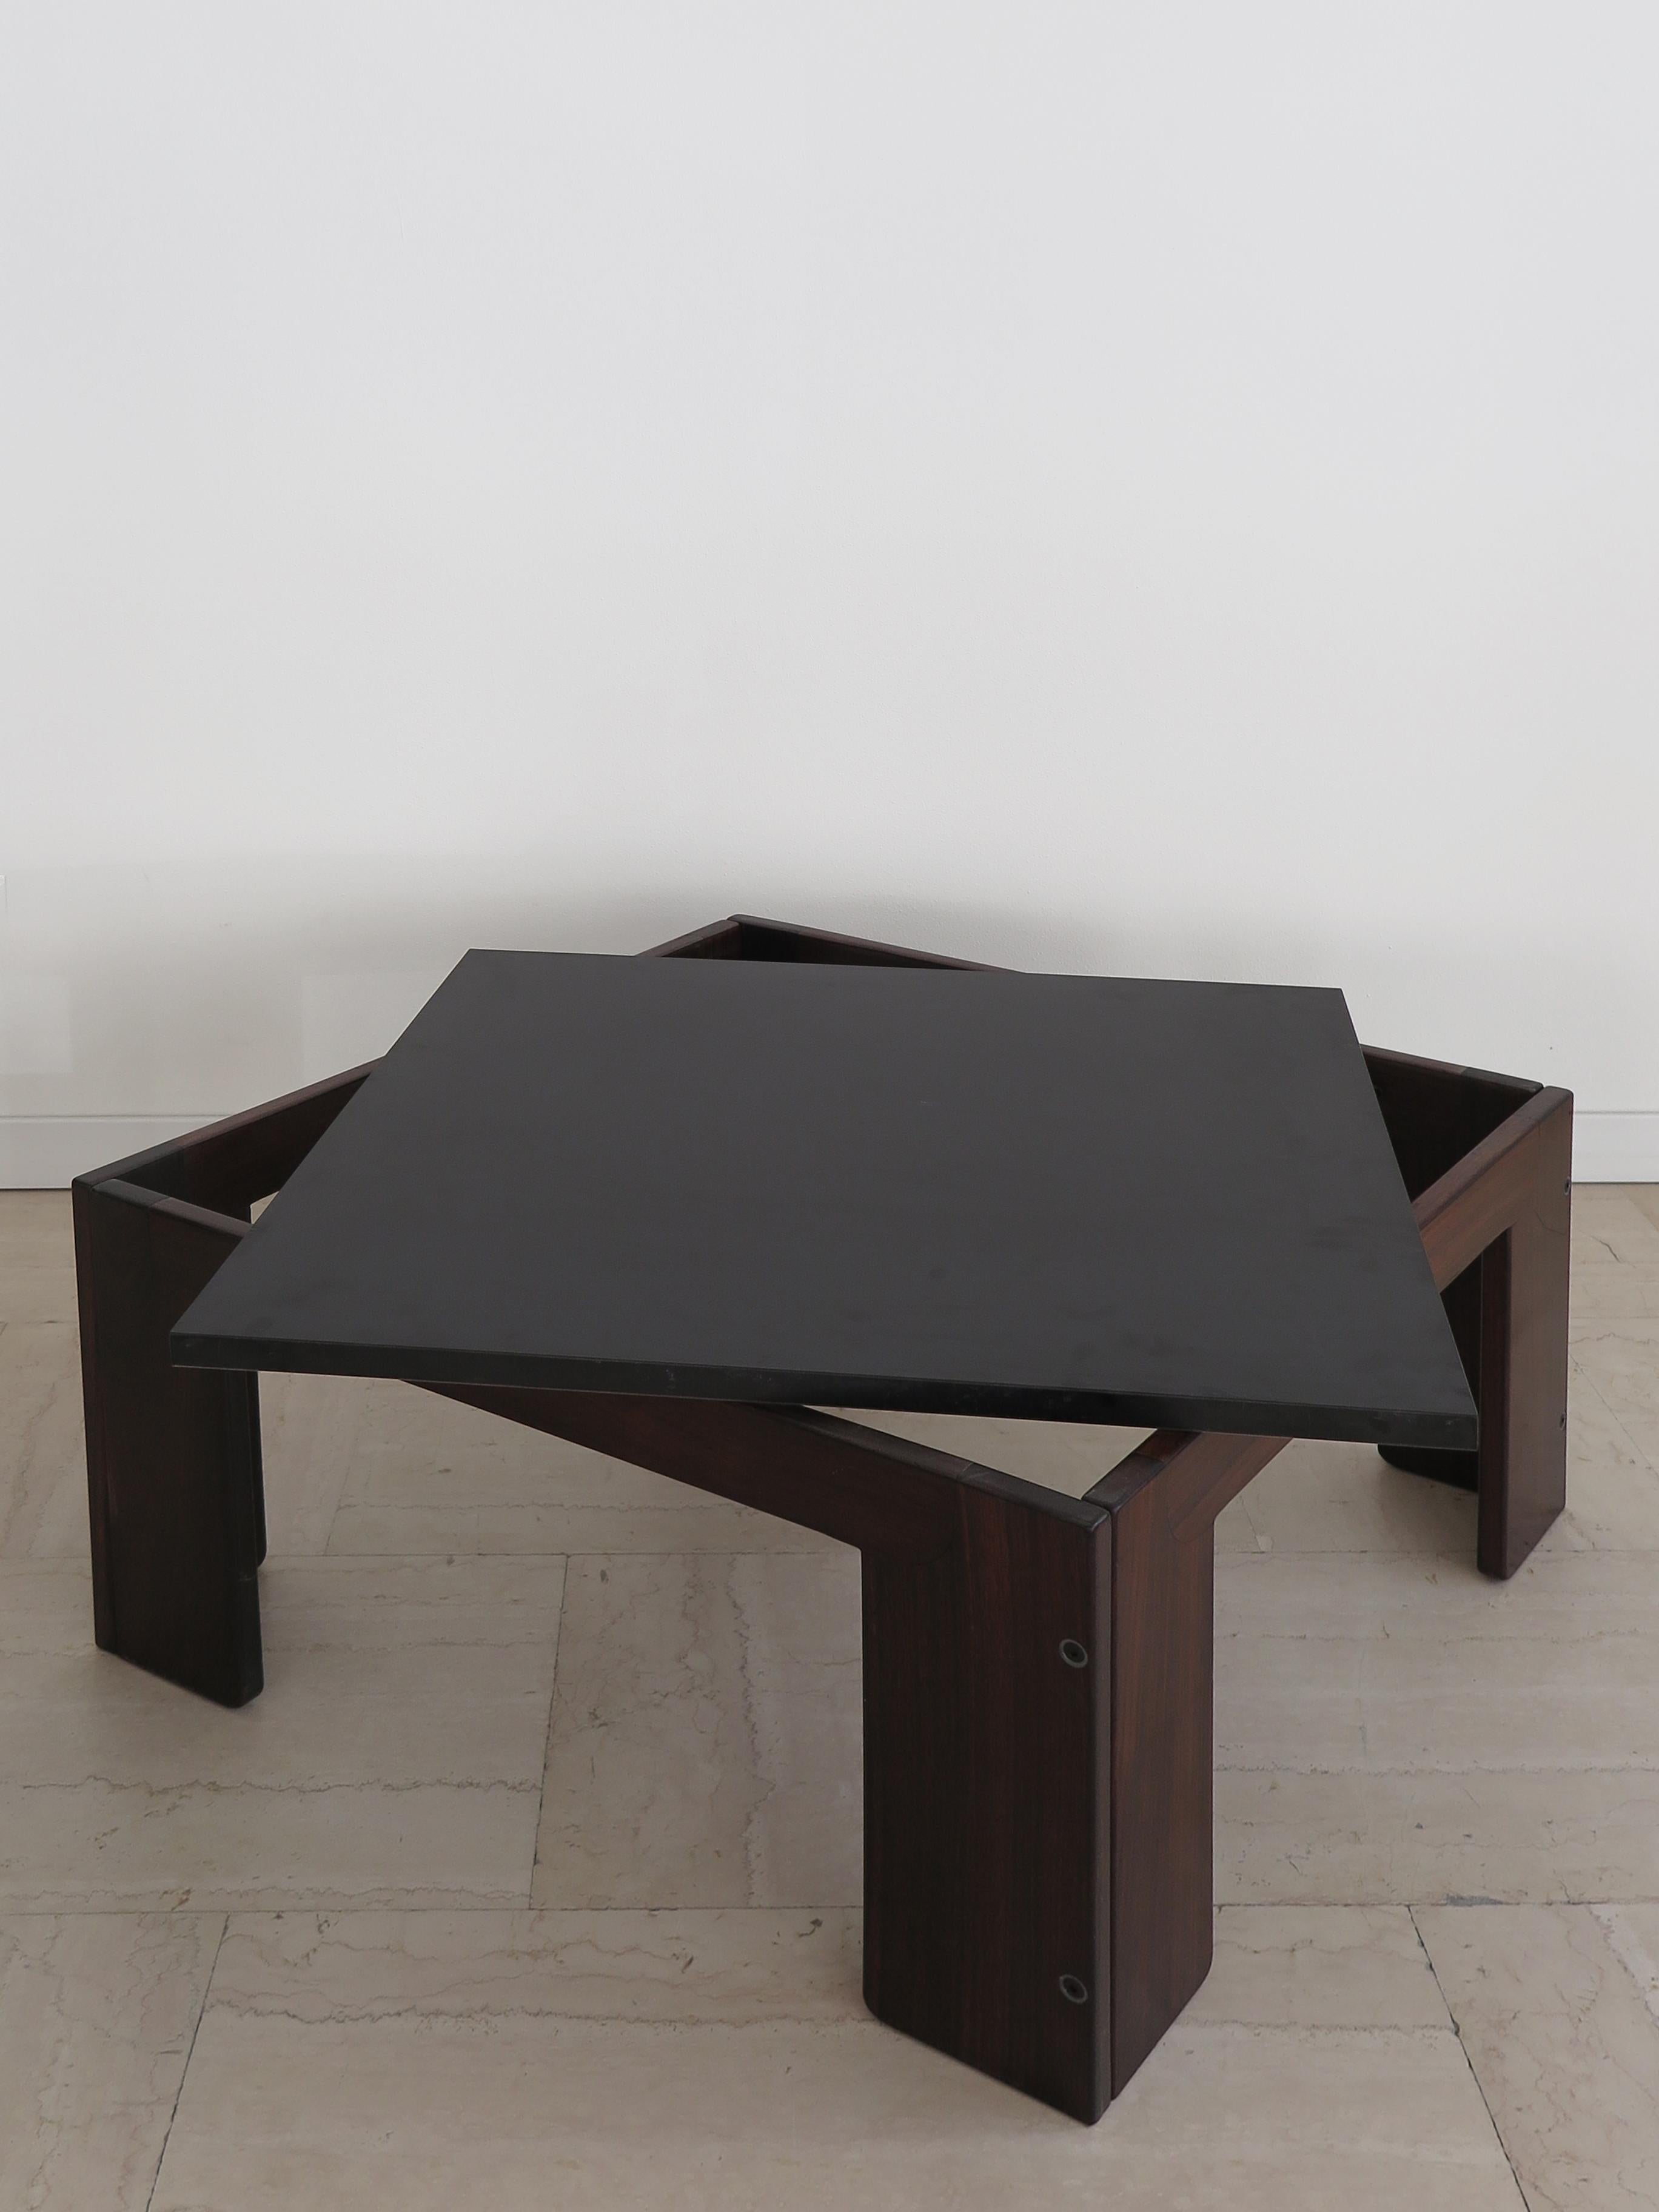 Afra & Tobia Scarpa Italian Wood Black & White Coffe Table for Cassina, 1960s For Sale 2